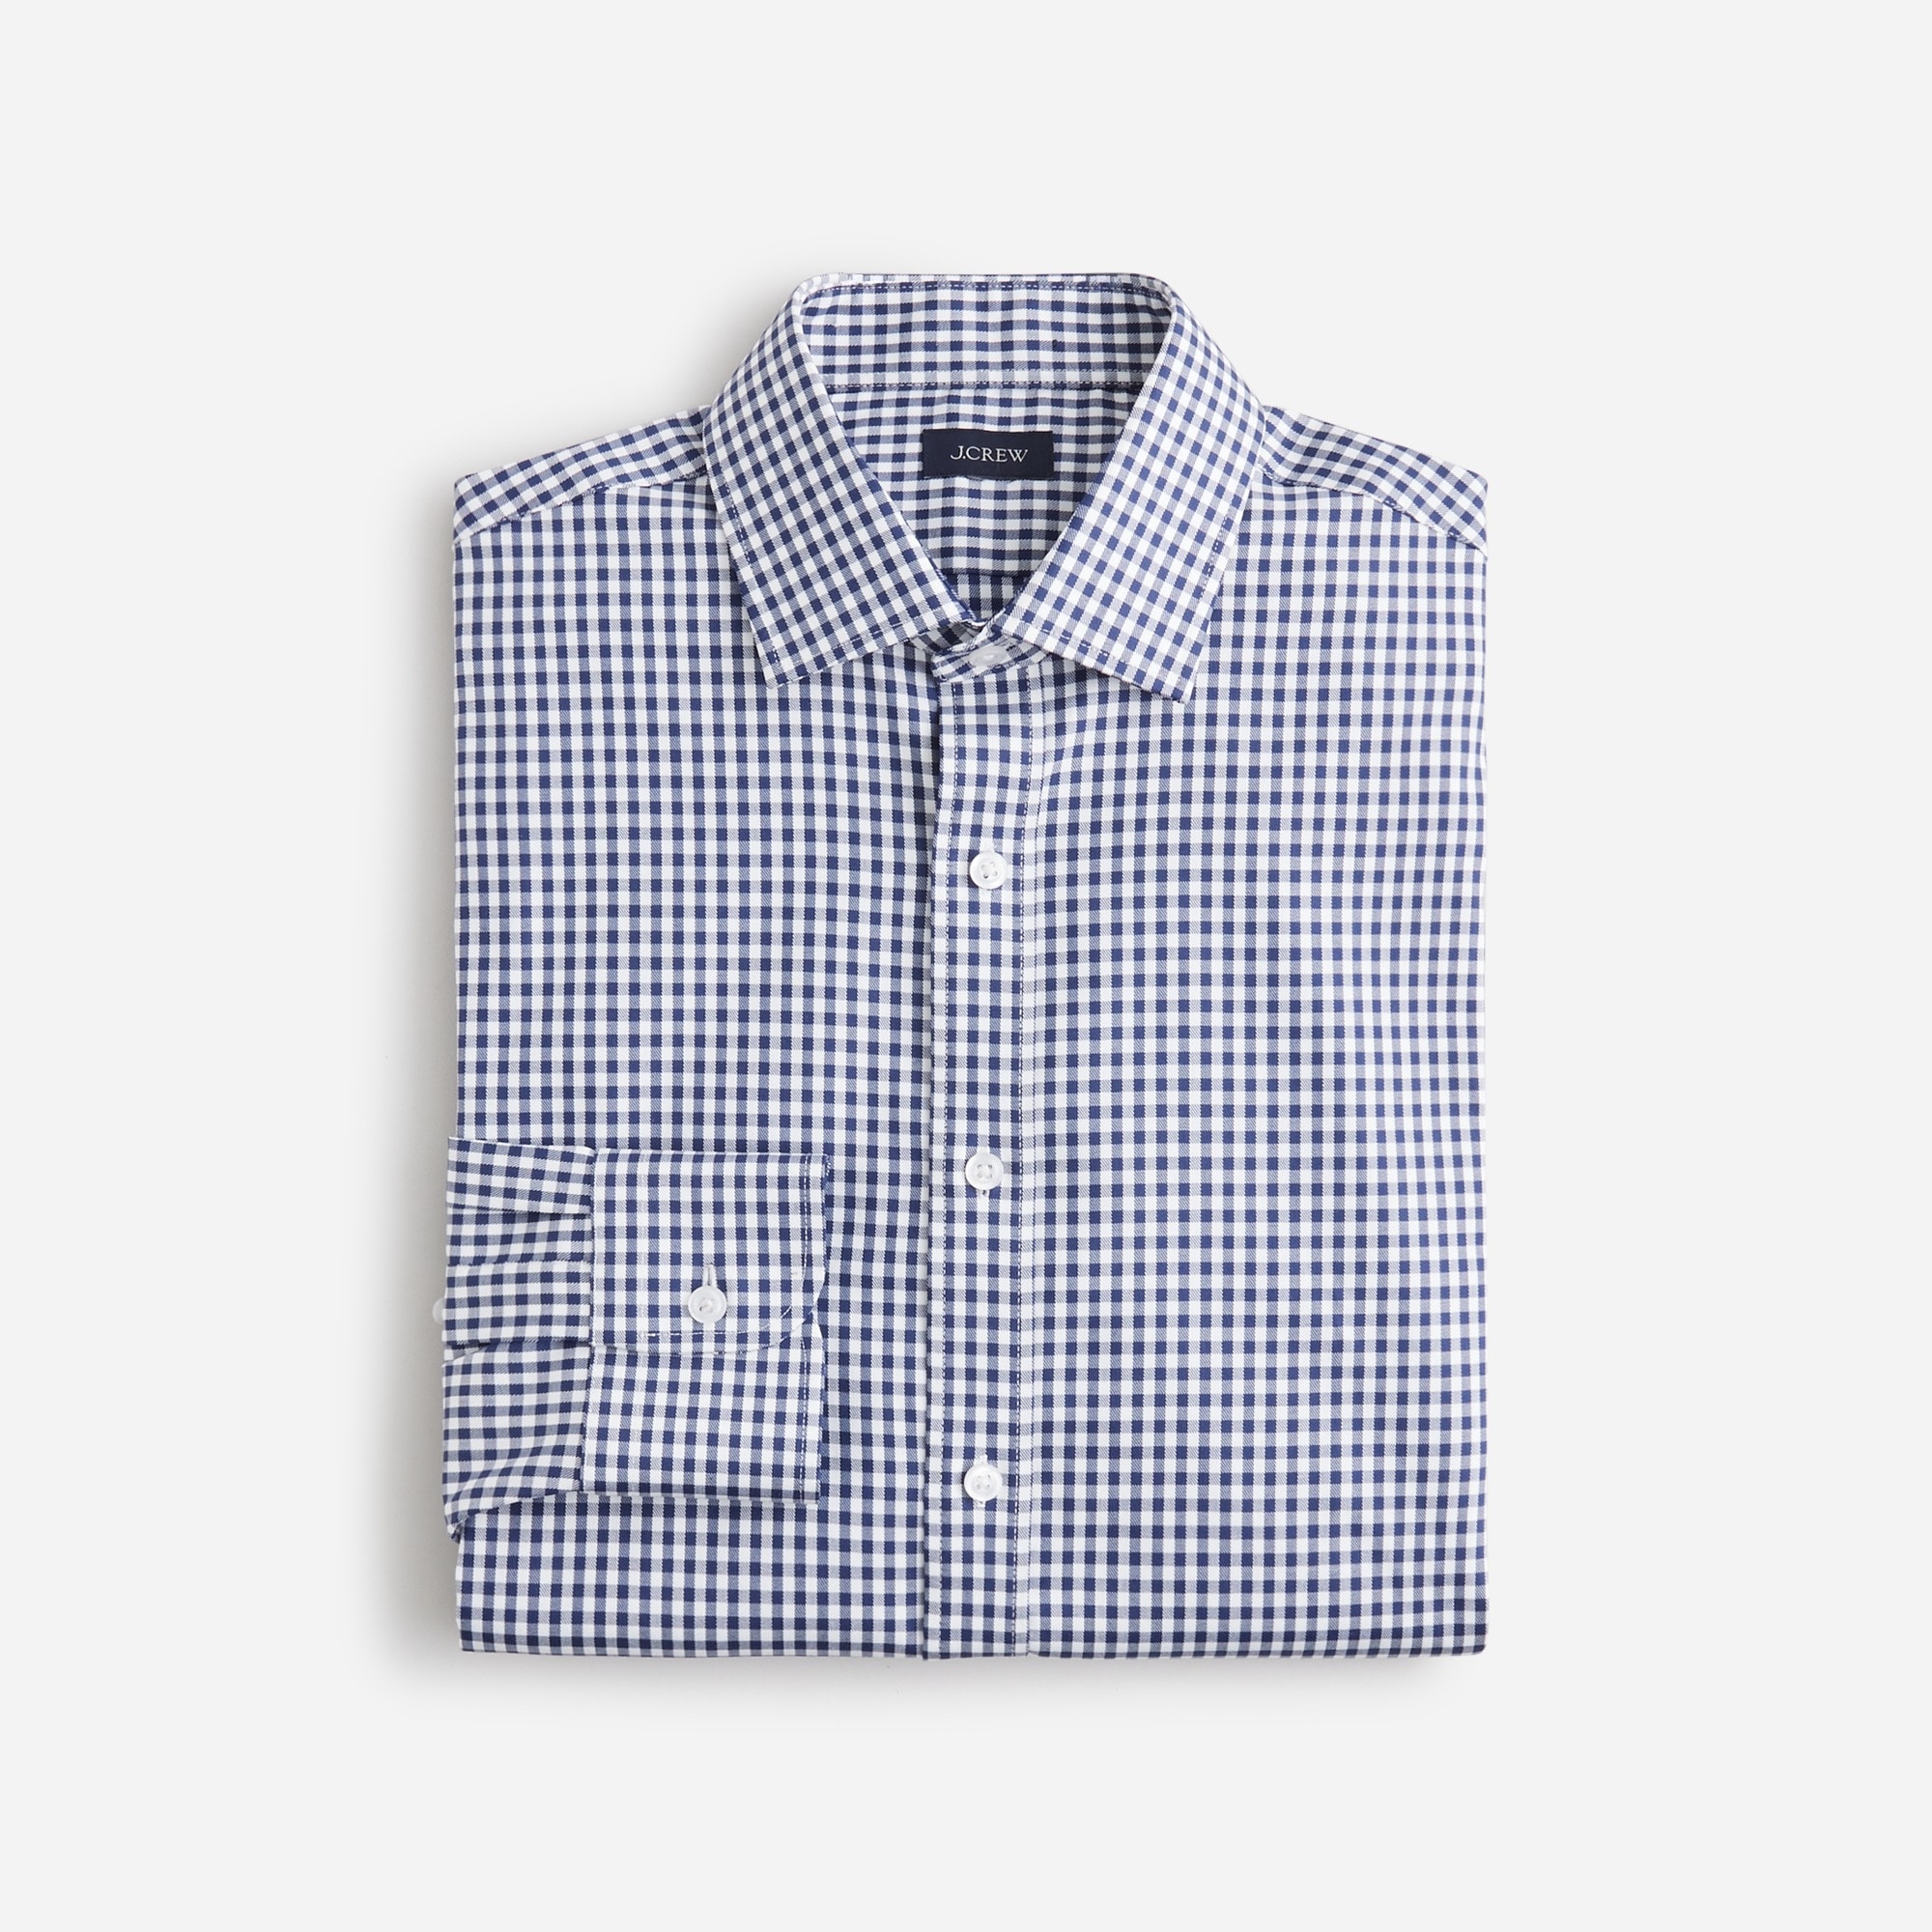 mens Bowery tech dress shirt with spread collar